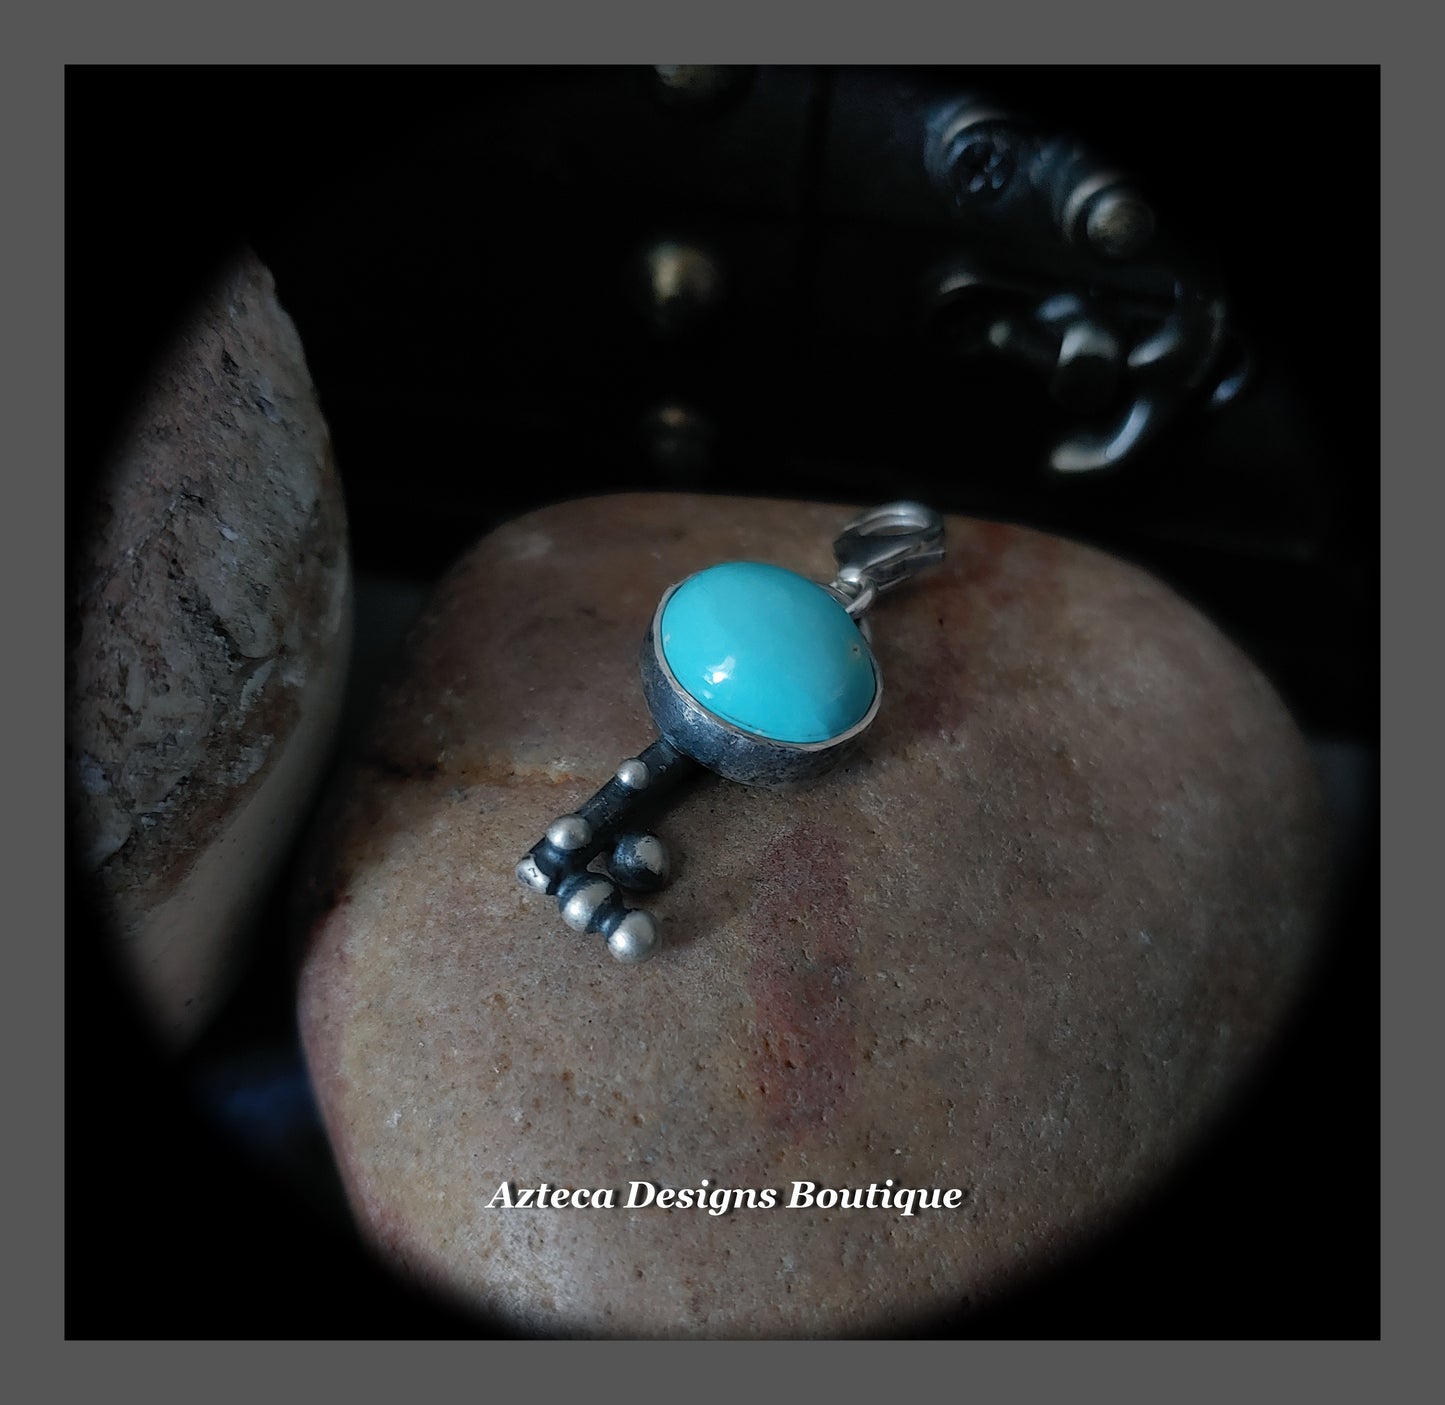 Lone Mountain Turquoise + Sterling Silver + Clip On Charm Pendant